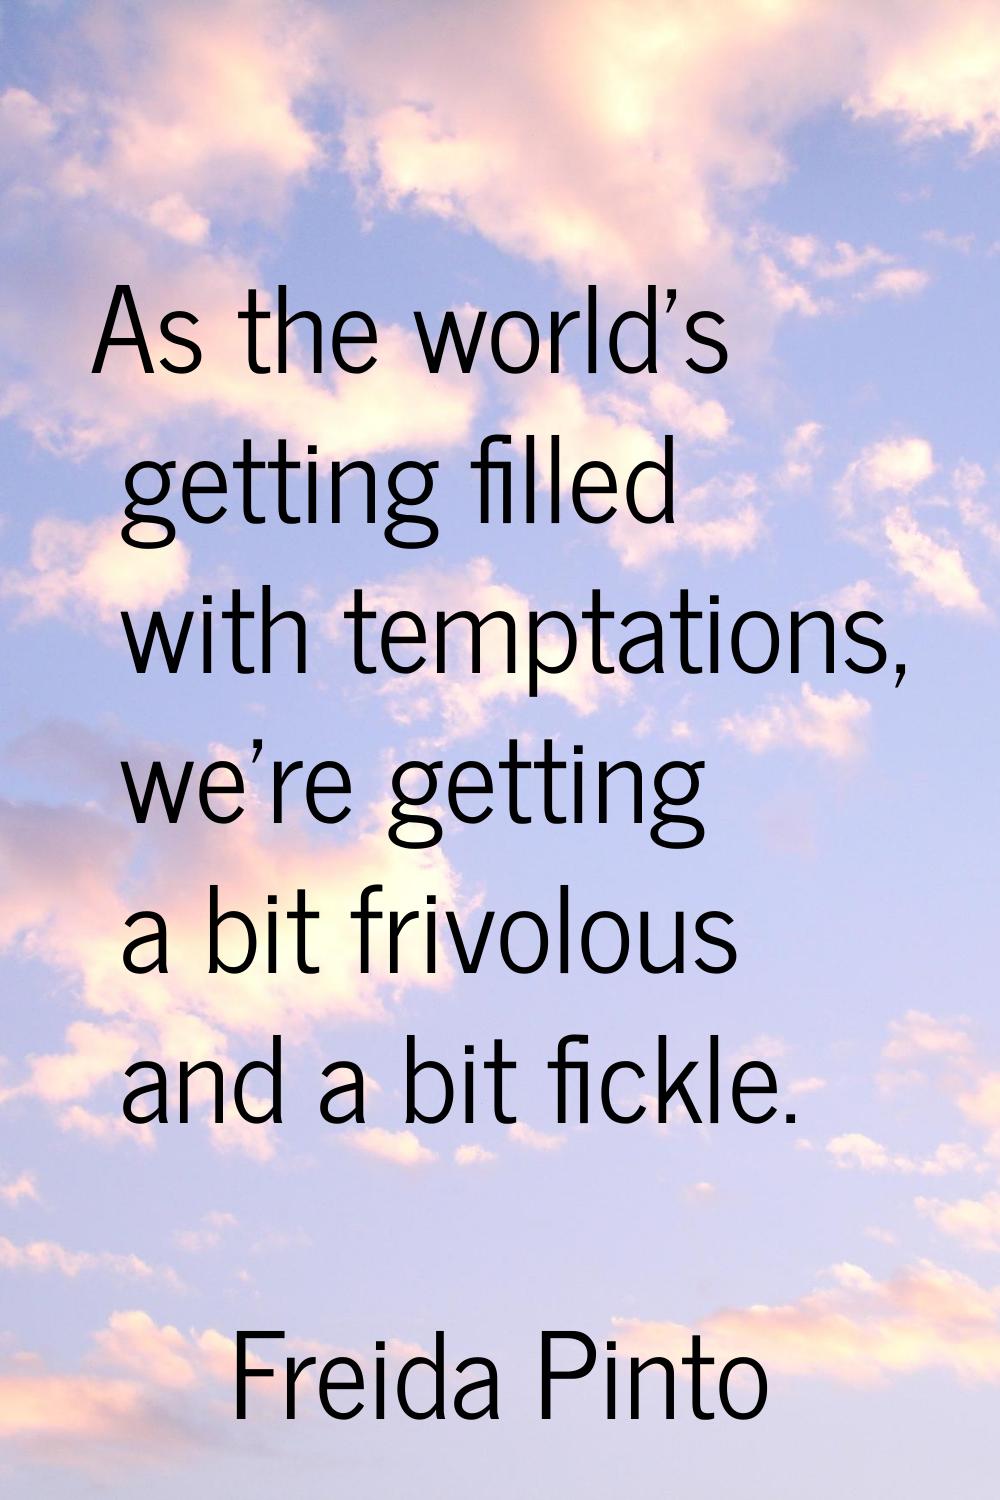 As the world's getting filled with temptations, we're getting a bit frivolous and a bit fickle.